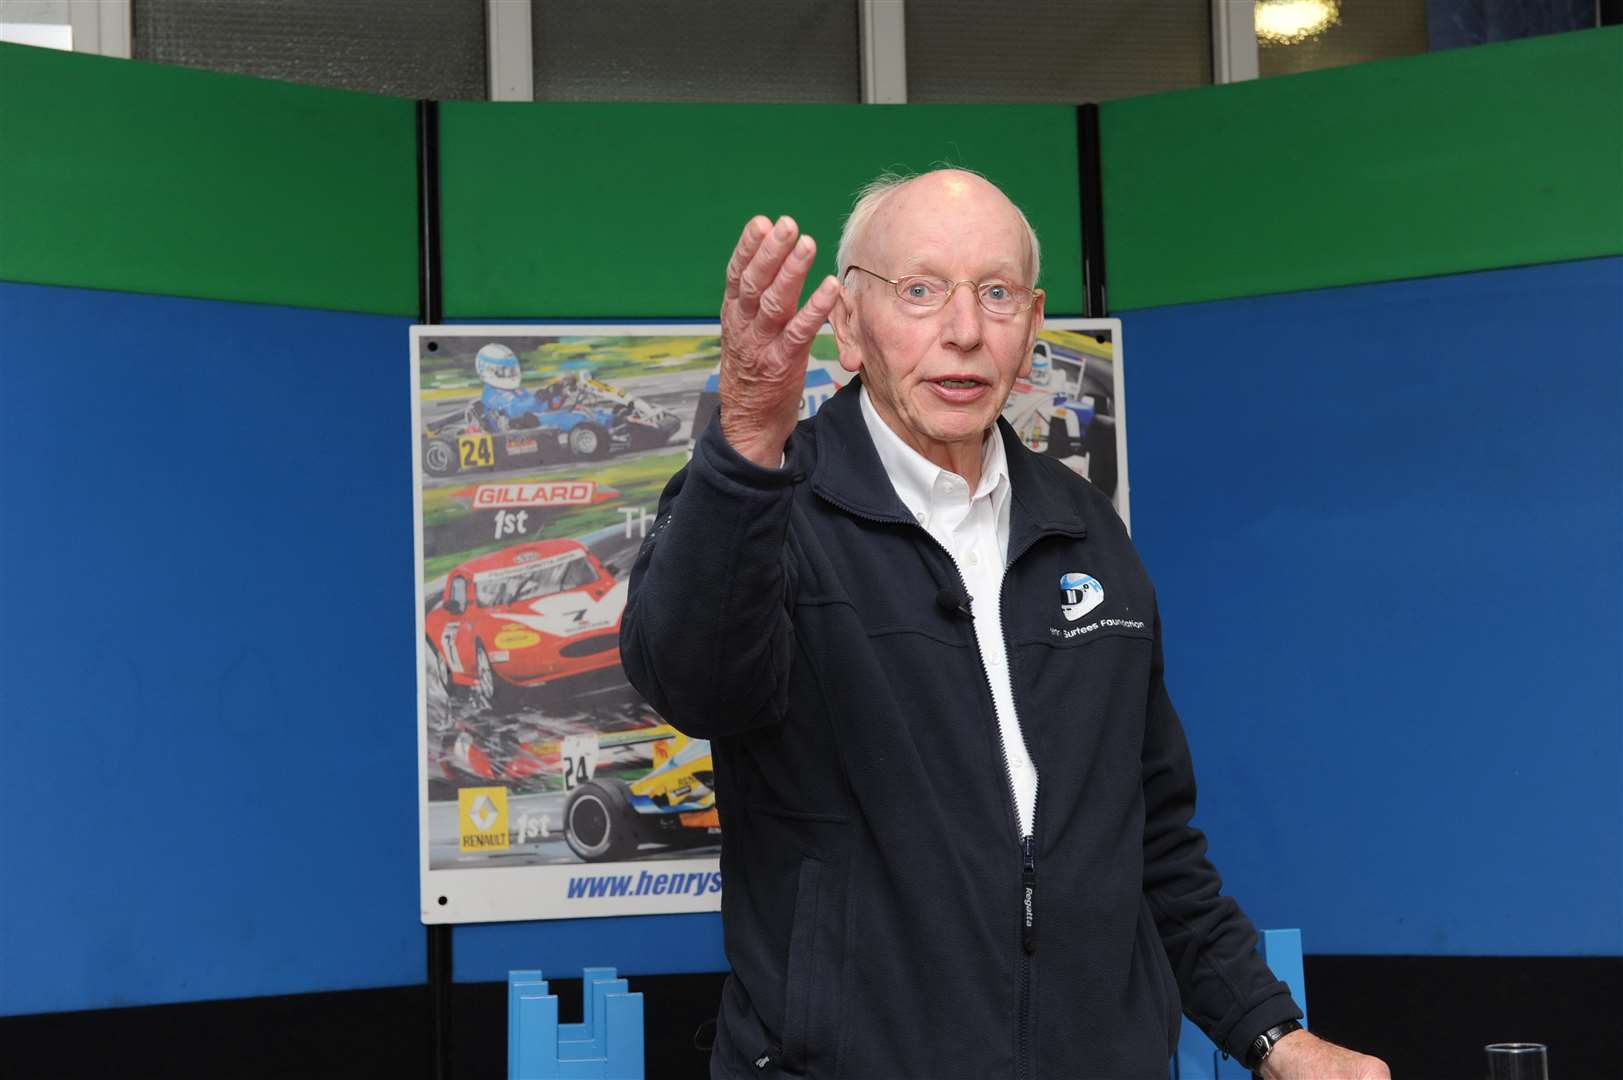 John Surtees at the Henry Surtees challenge - charity event set up in memory of young racing driver Henry Surtees